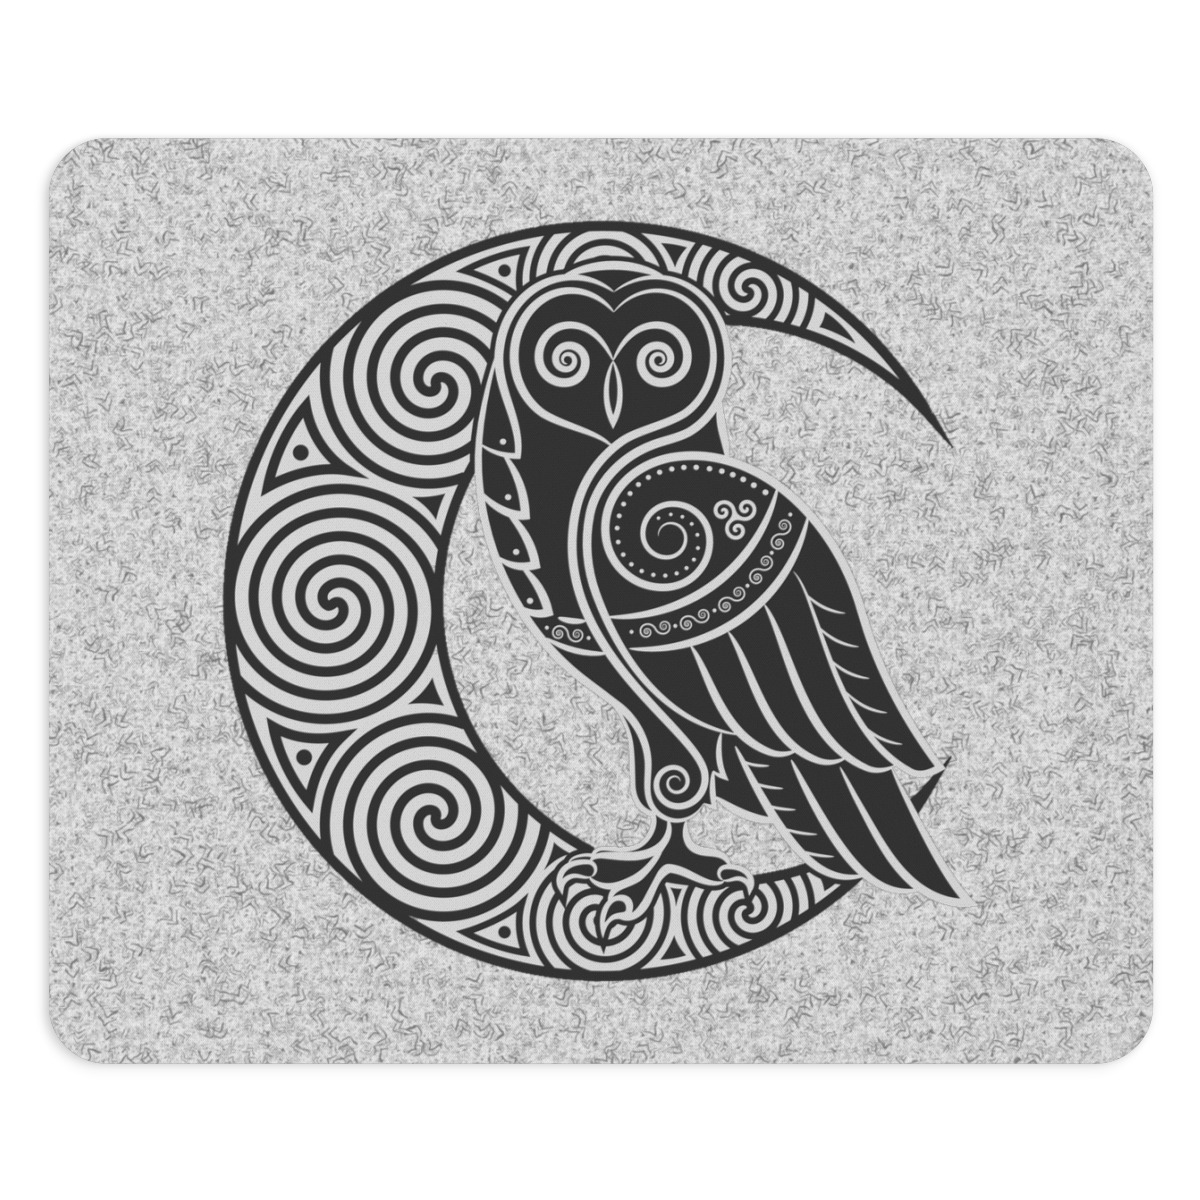 Gray Owl Crescent Moon Mouse Pad